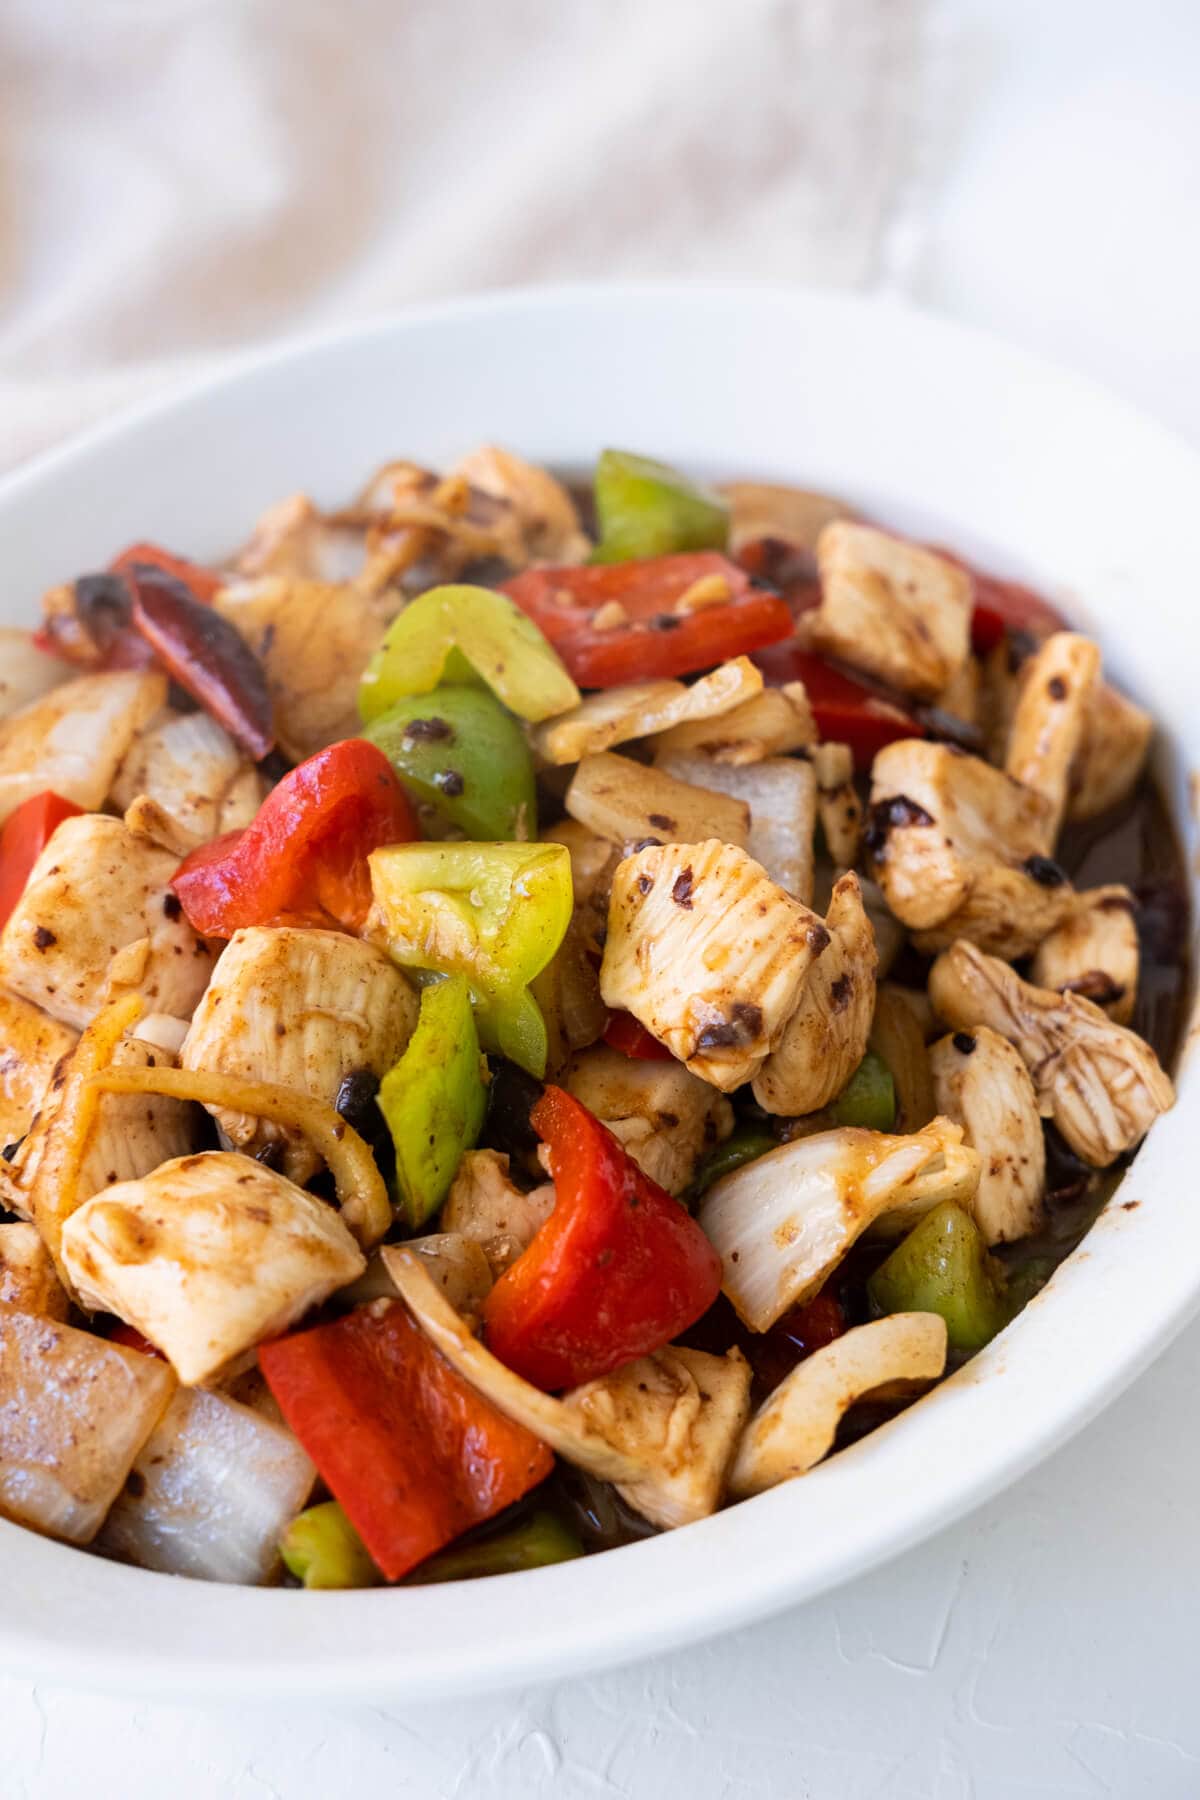 Chicken with red and green bell peppers coated in black bean sauce.